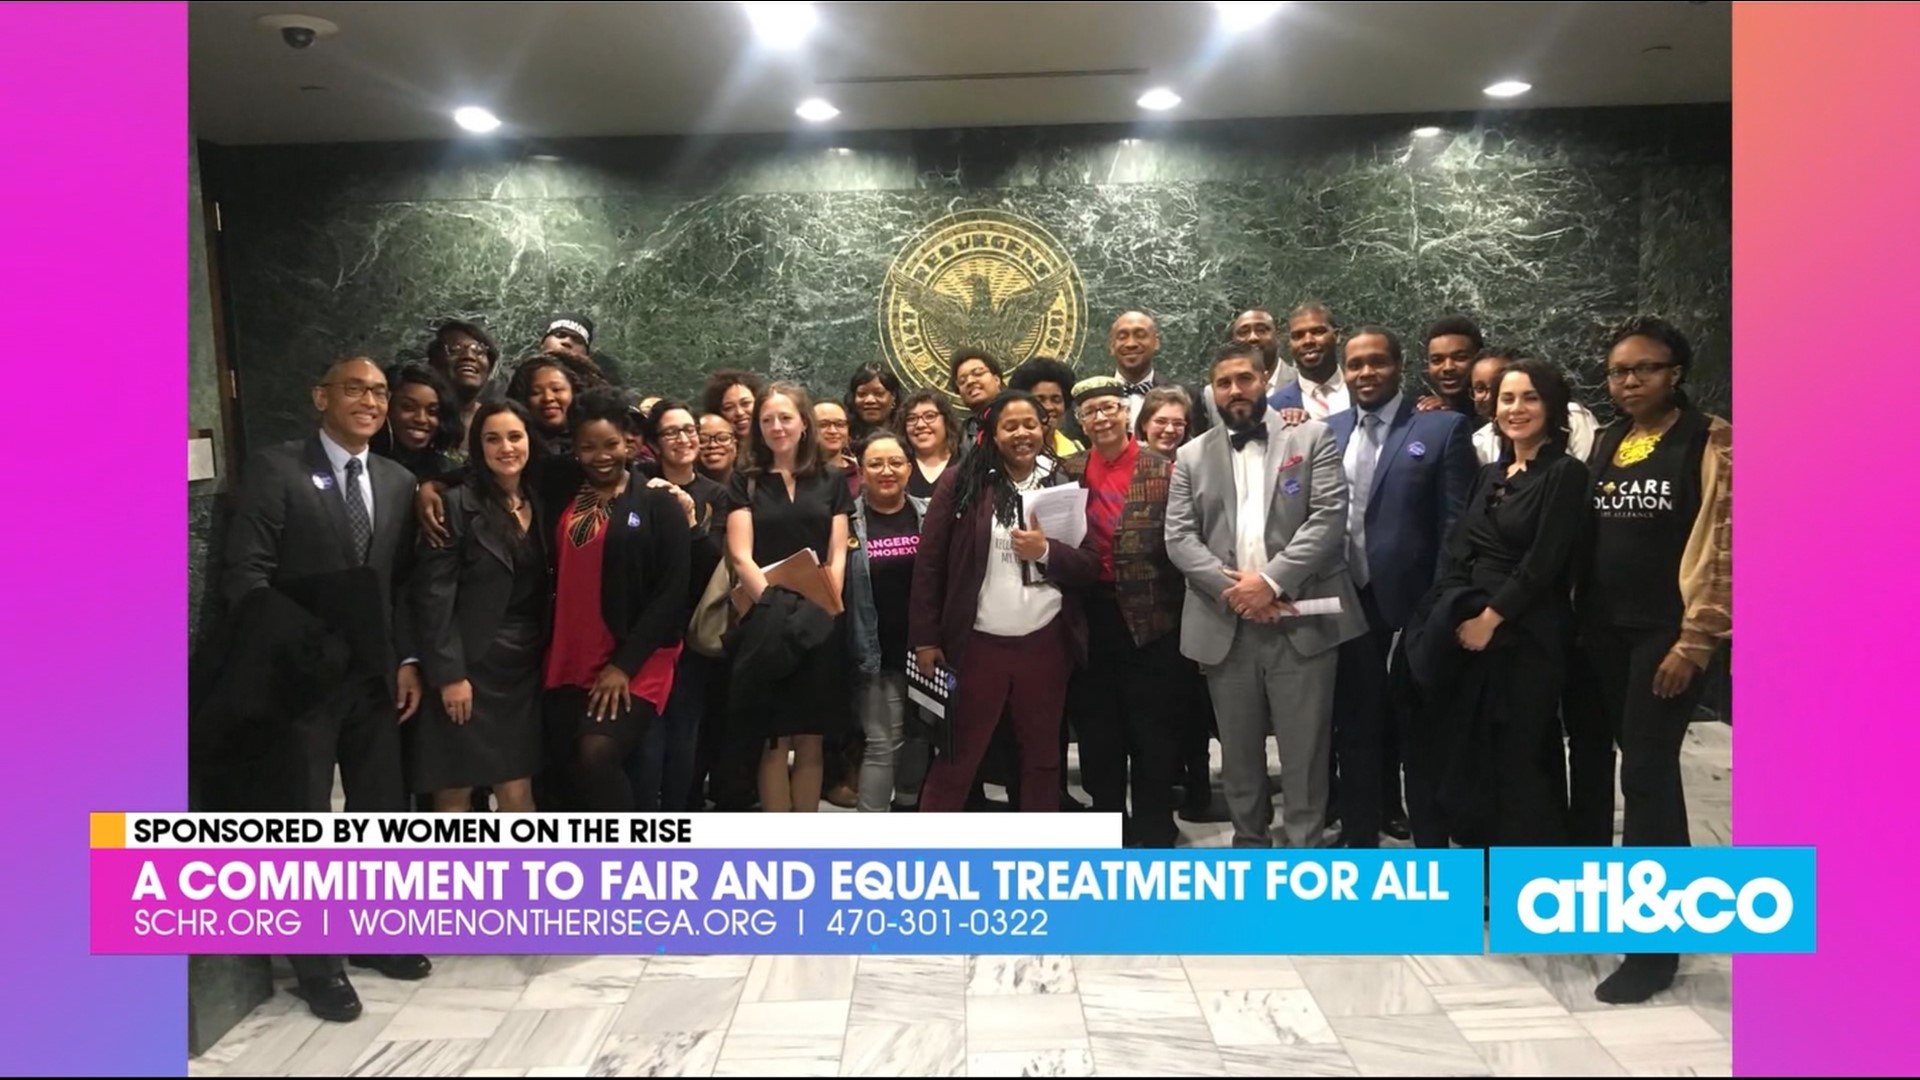 Commitment to fair and equal treatment for all! Learn about the inspiring work of the Southern Center for Human Rights and their partnership with Women on the Rise.